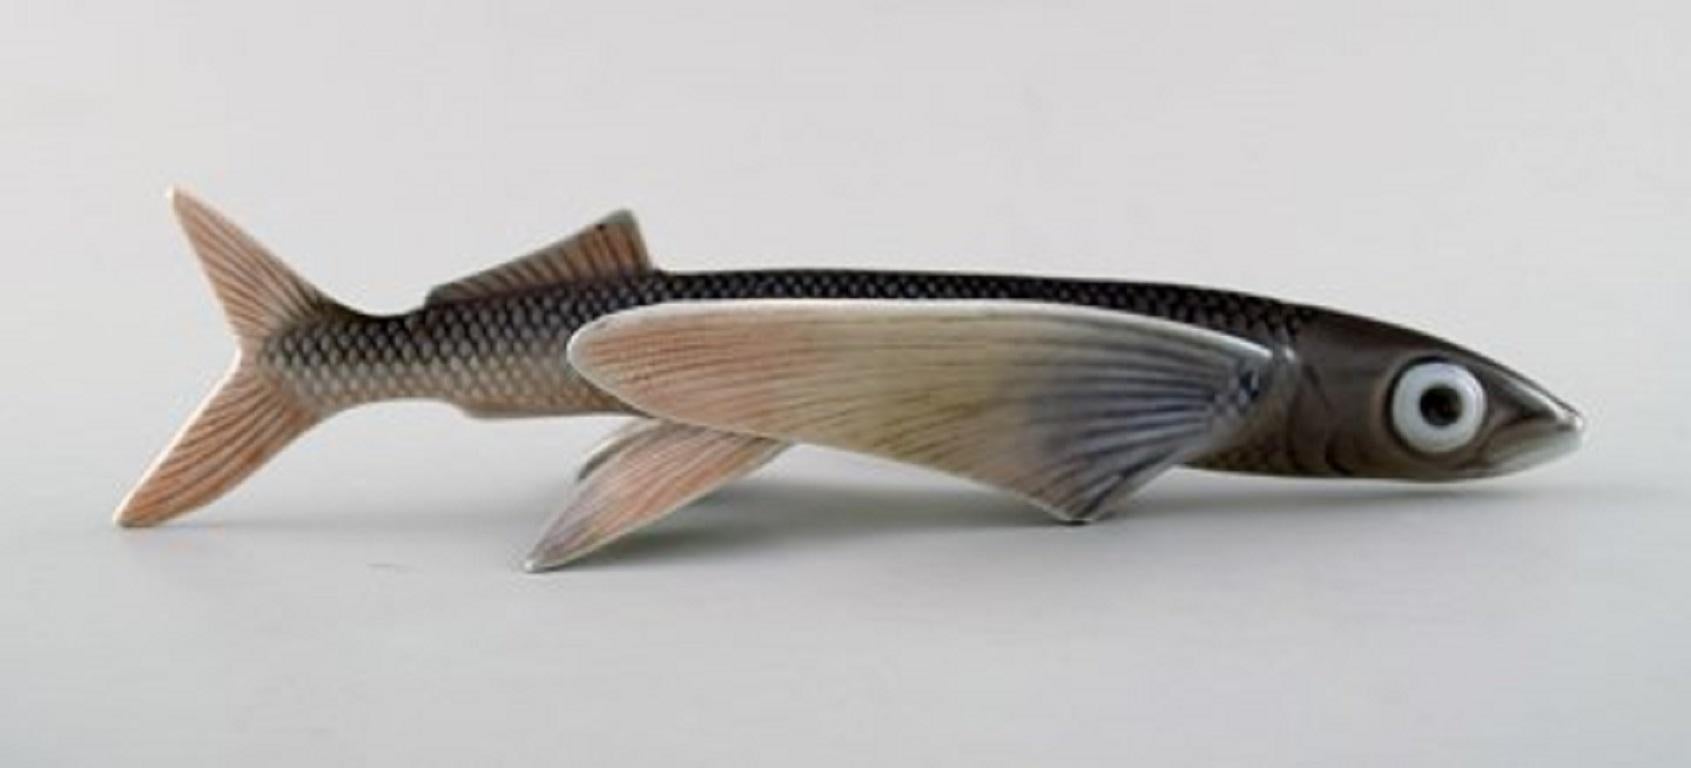 Vintage Royal Copenhagen flying fish figurine number 3050
Designed by Platen Hallermundt, 1960.
Measures: 16 cm x 9 cm.
In perfect condition. 1st. factory quality.